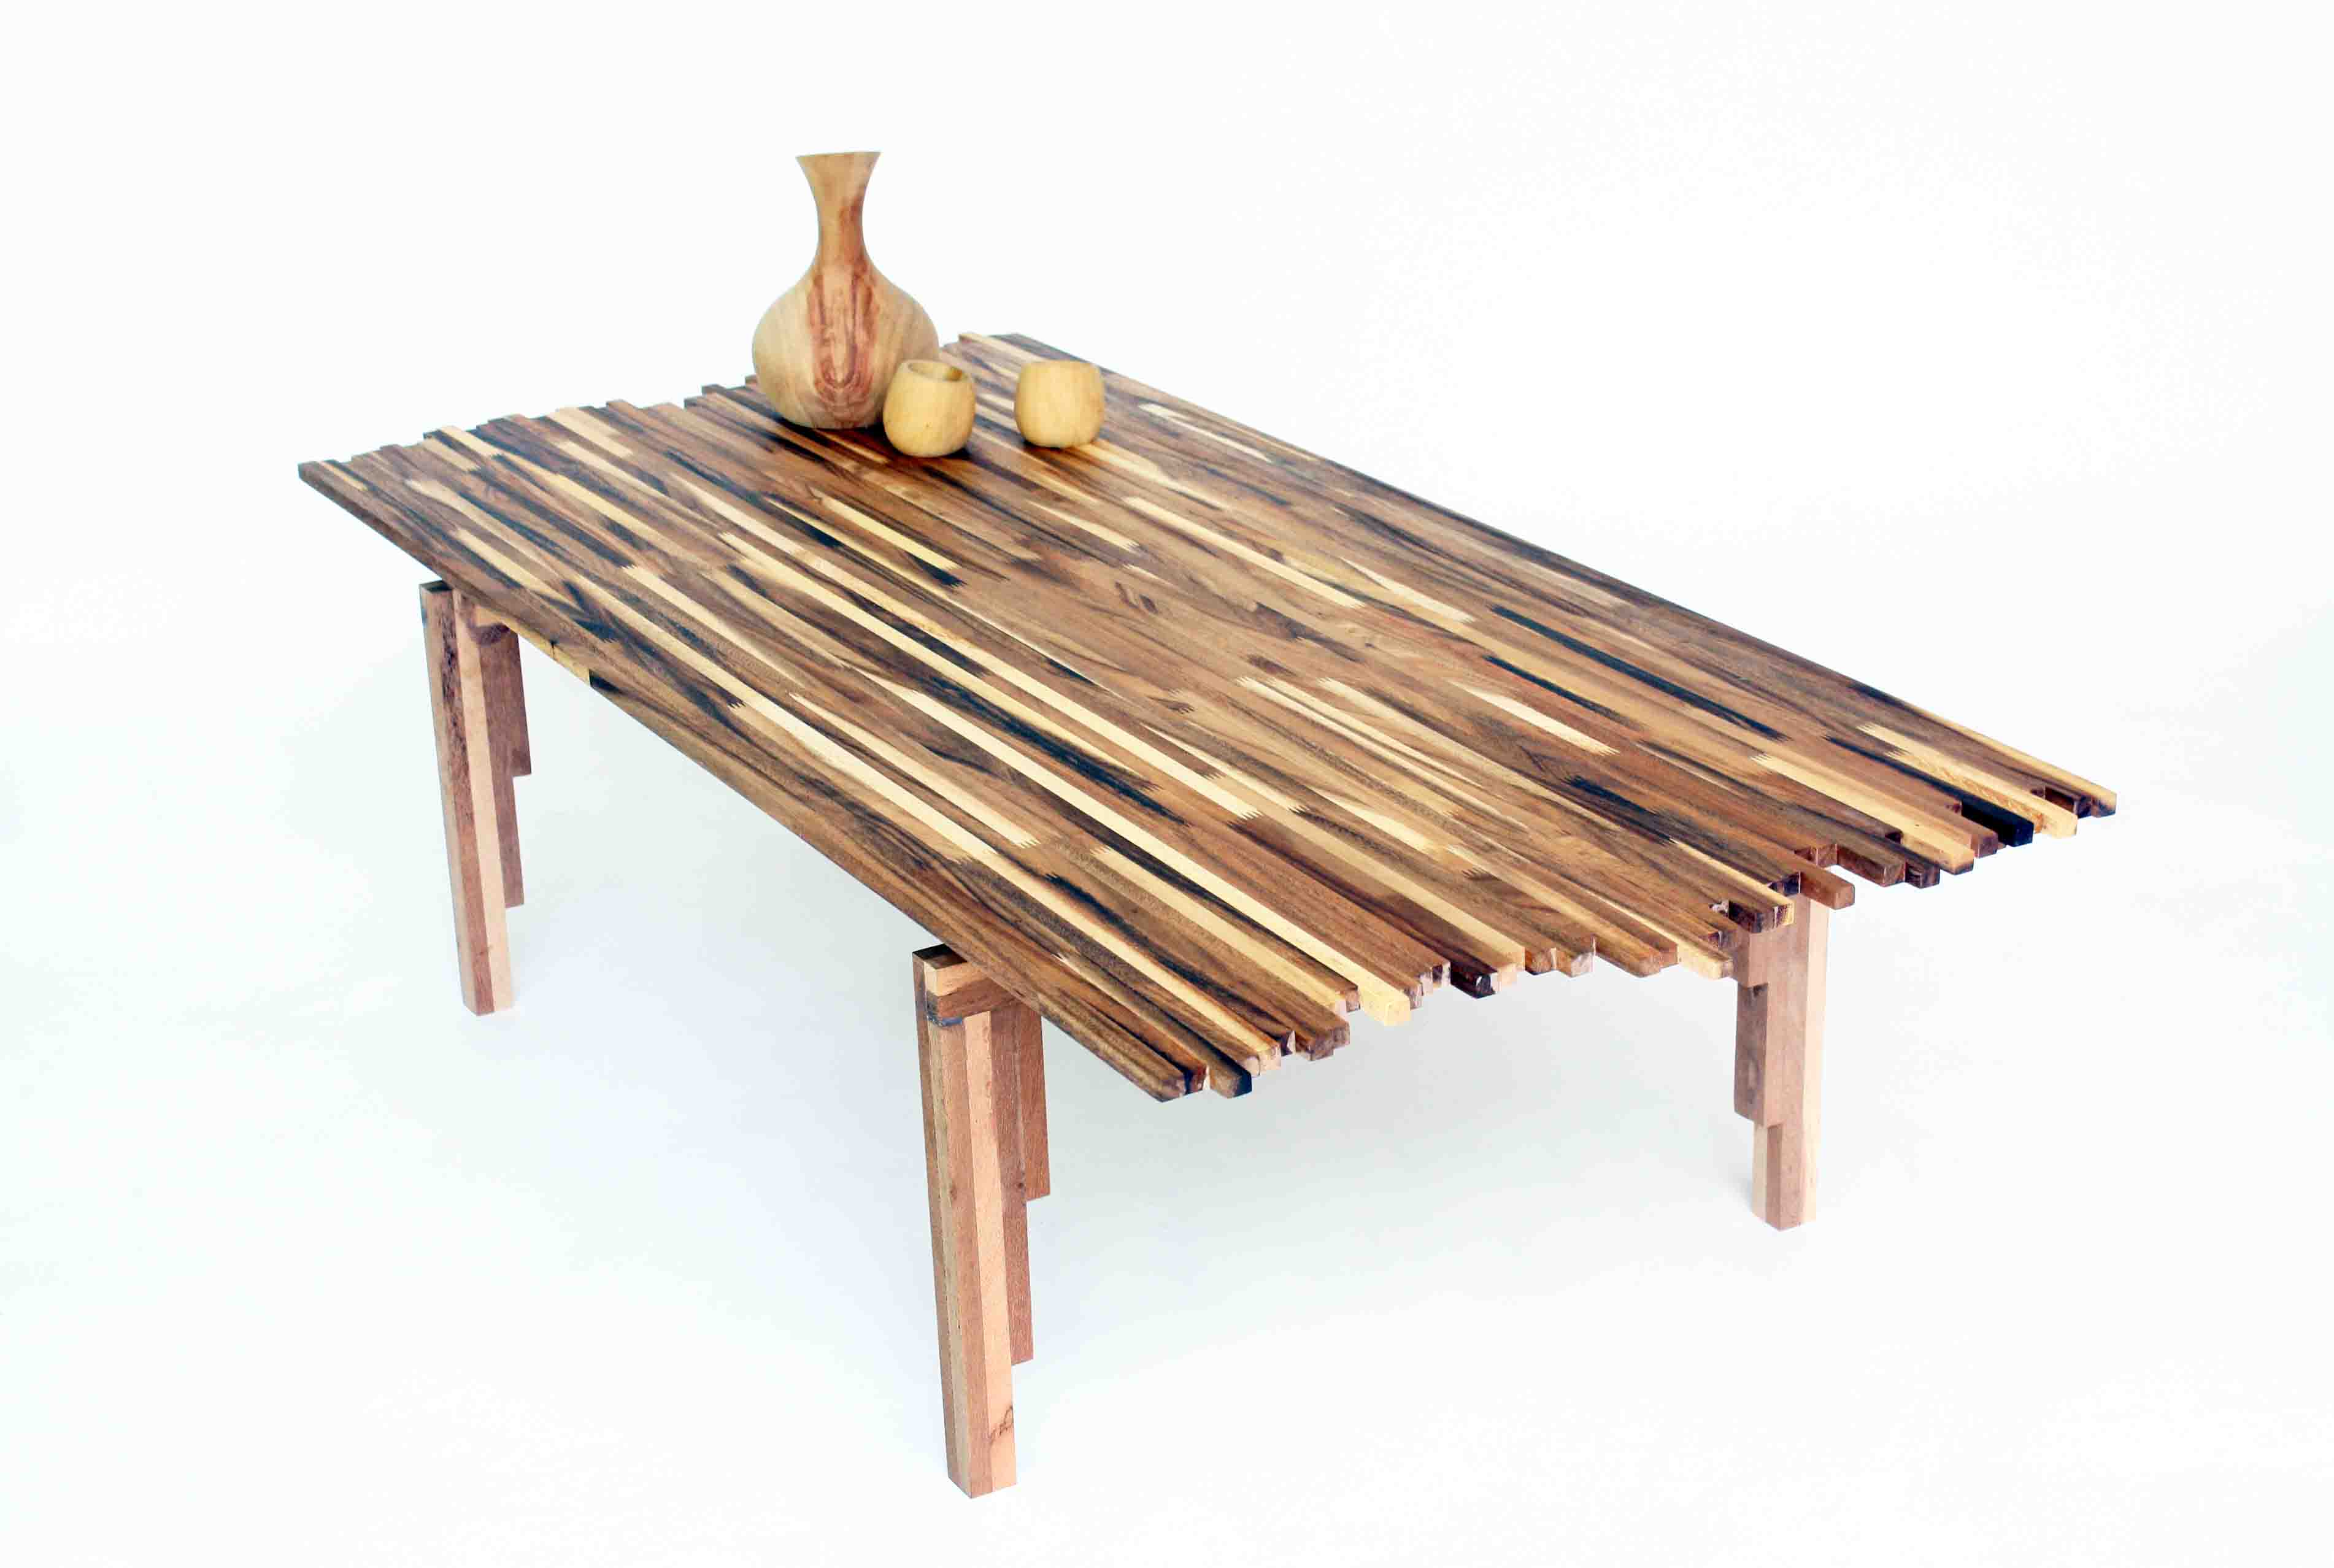 wood table design pictures photo - 3